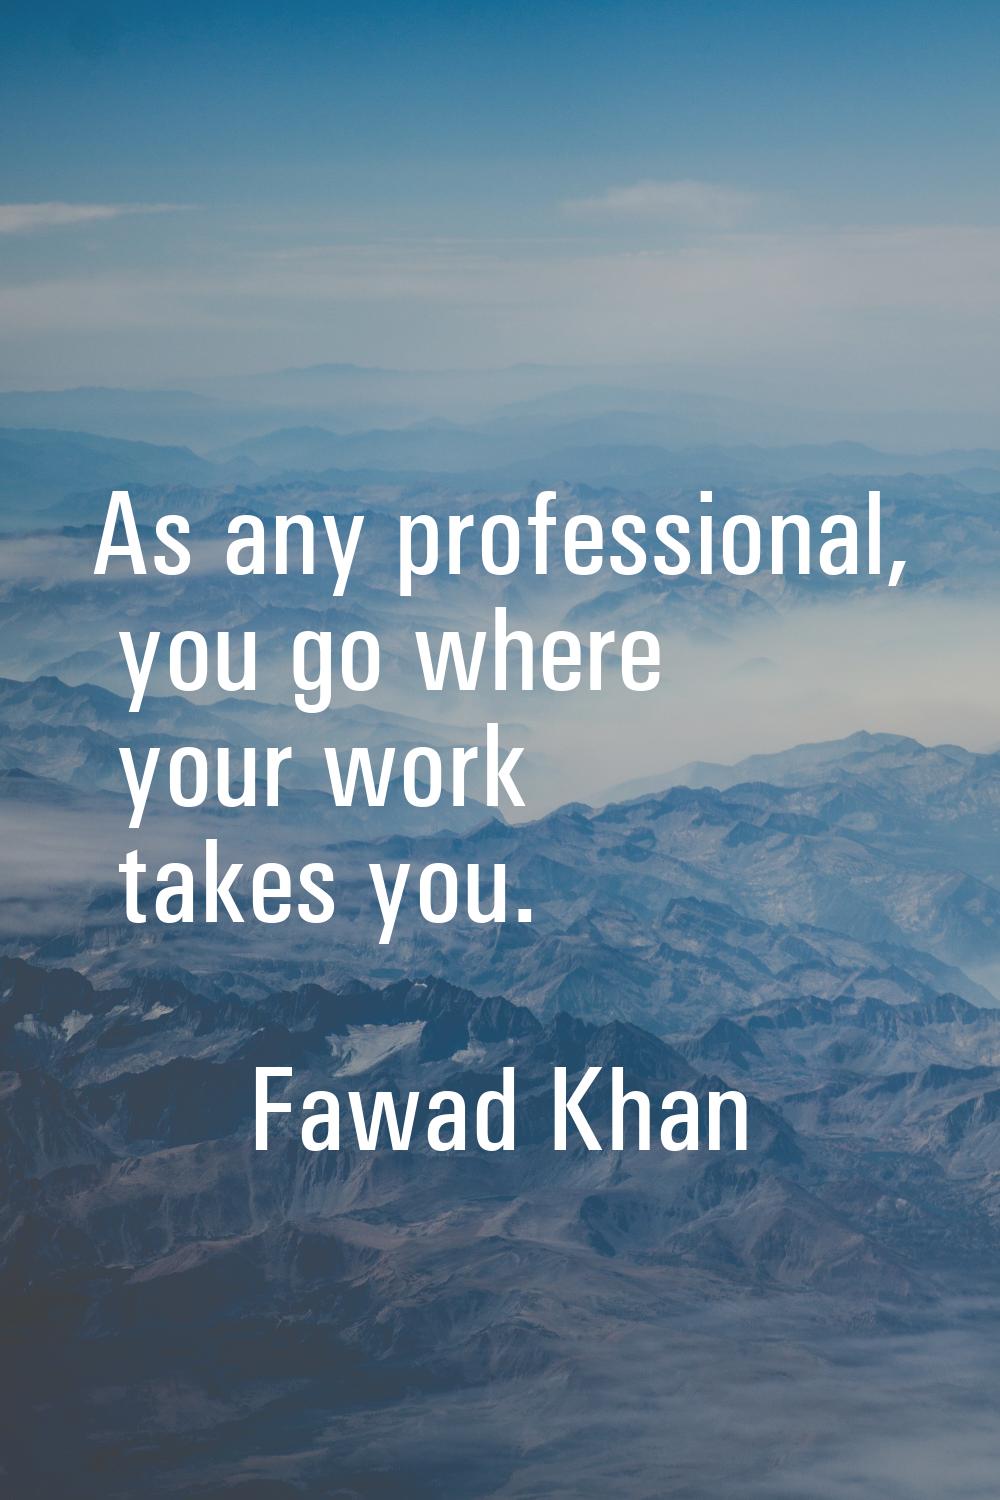 As any professional, you go where your work takes you.